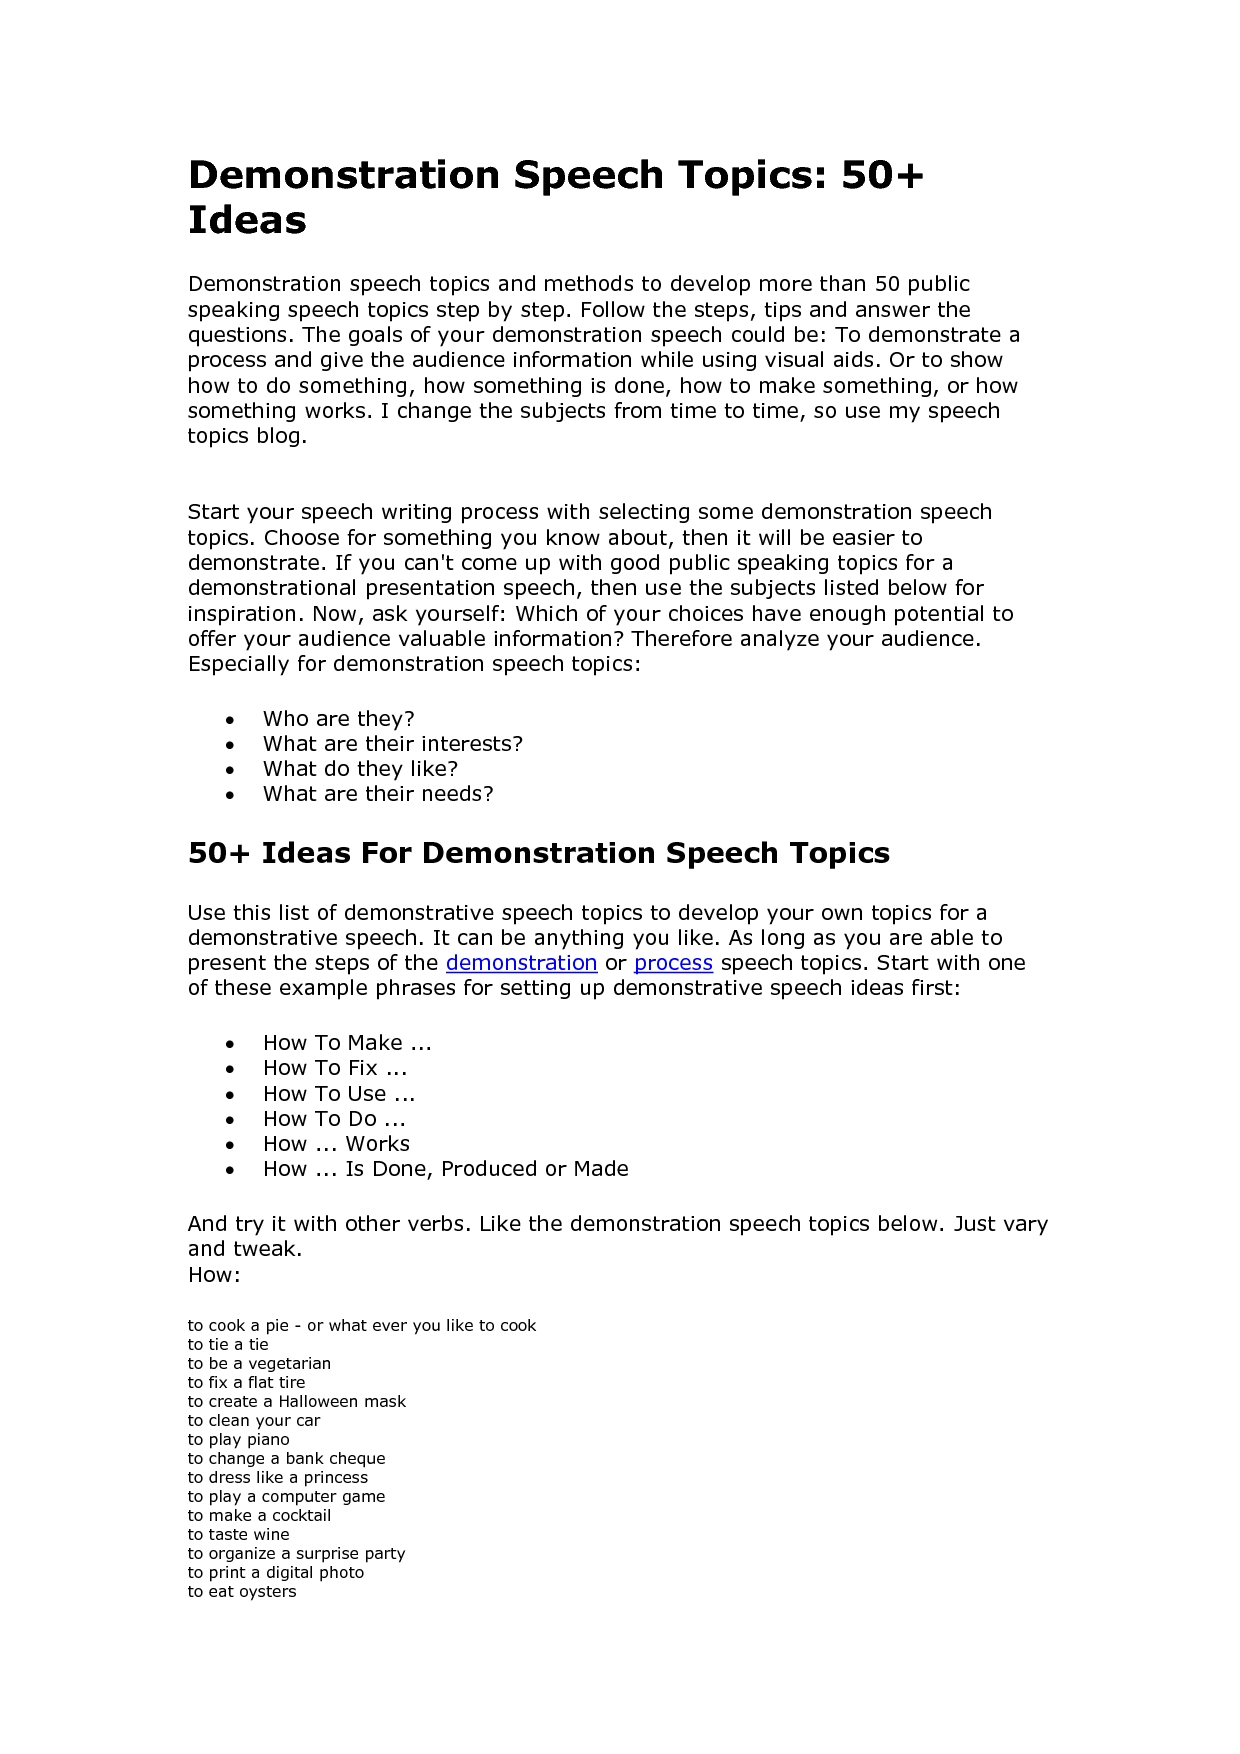 good demonstration speech topics for college students